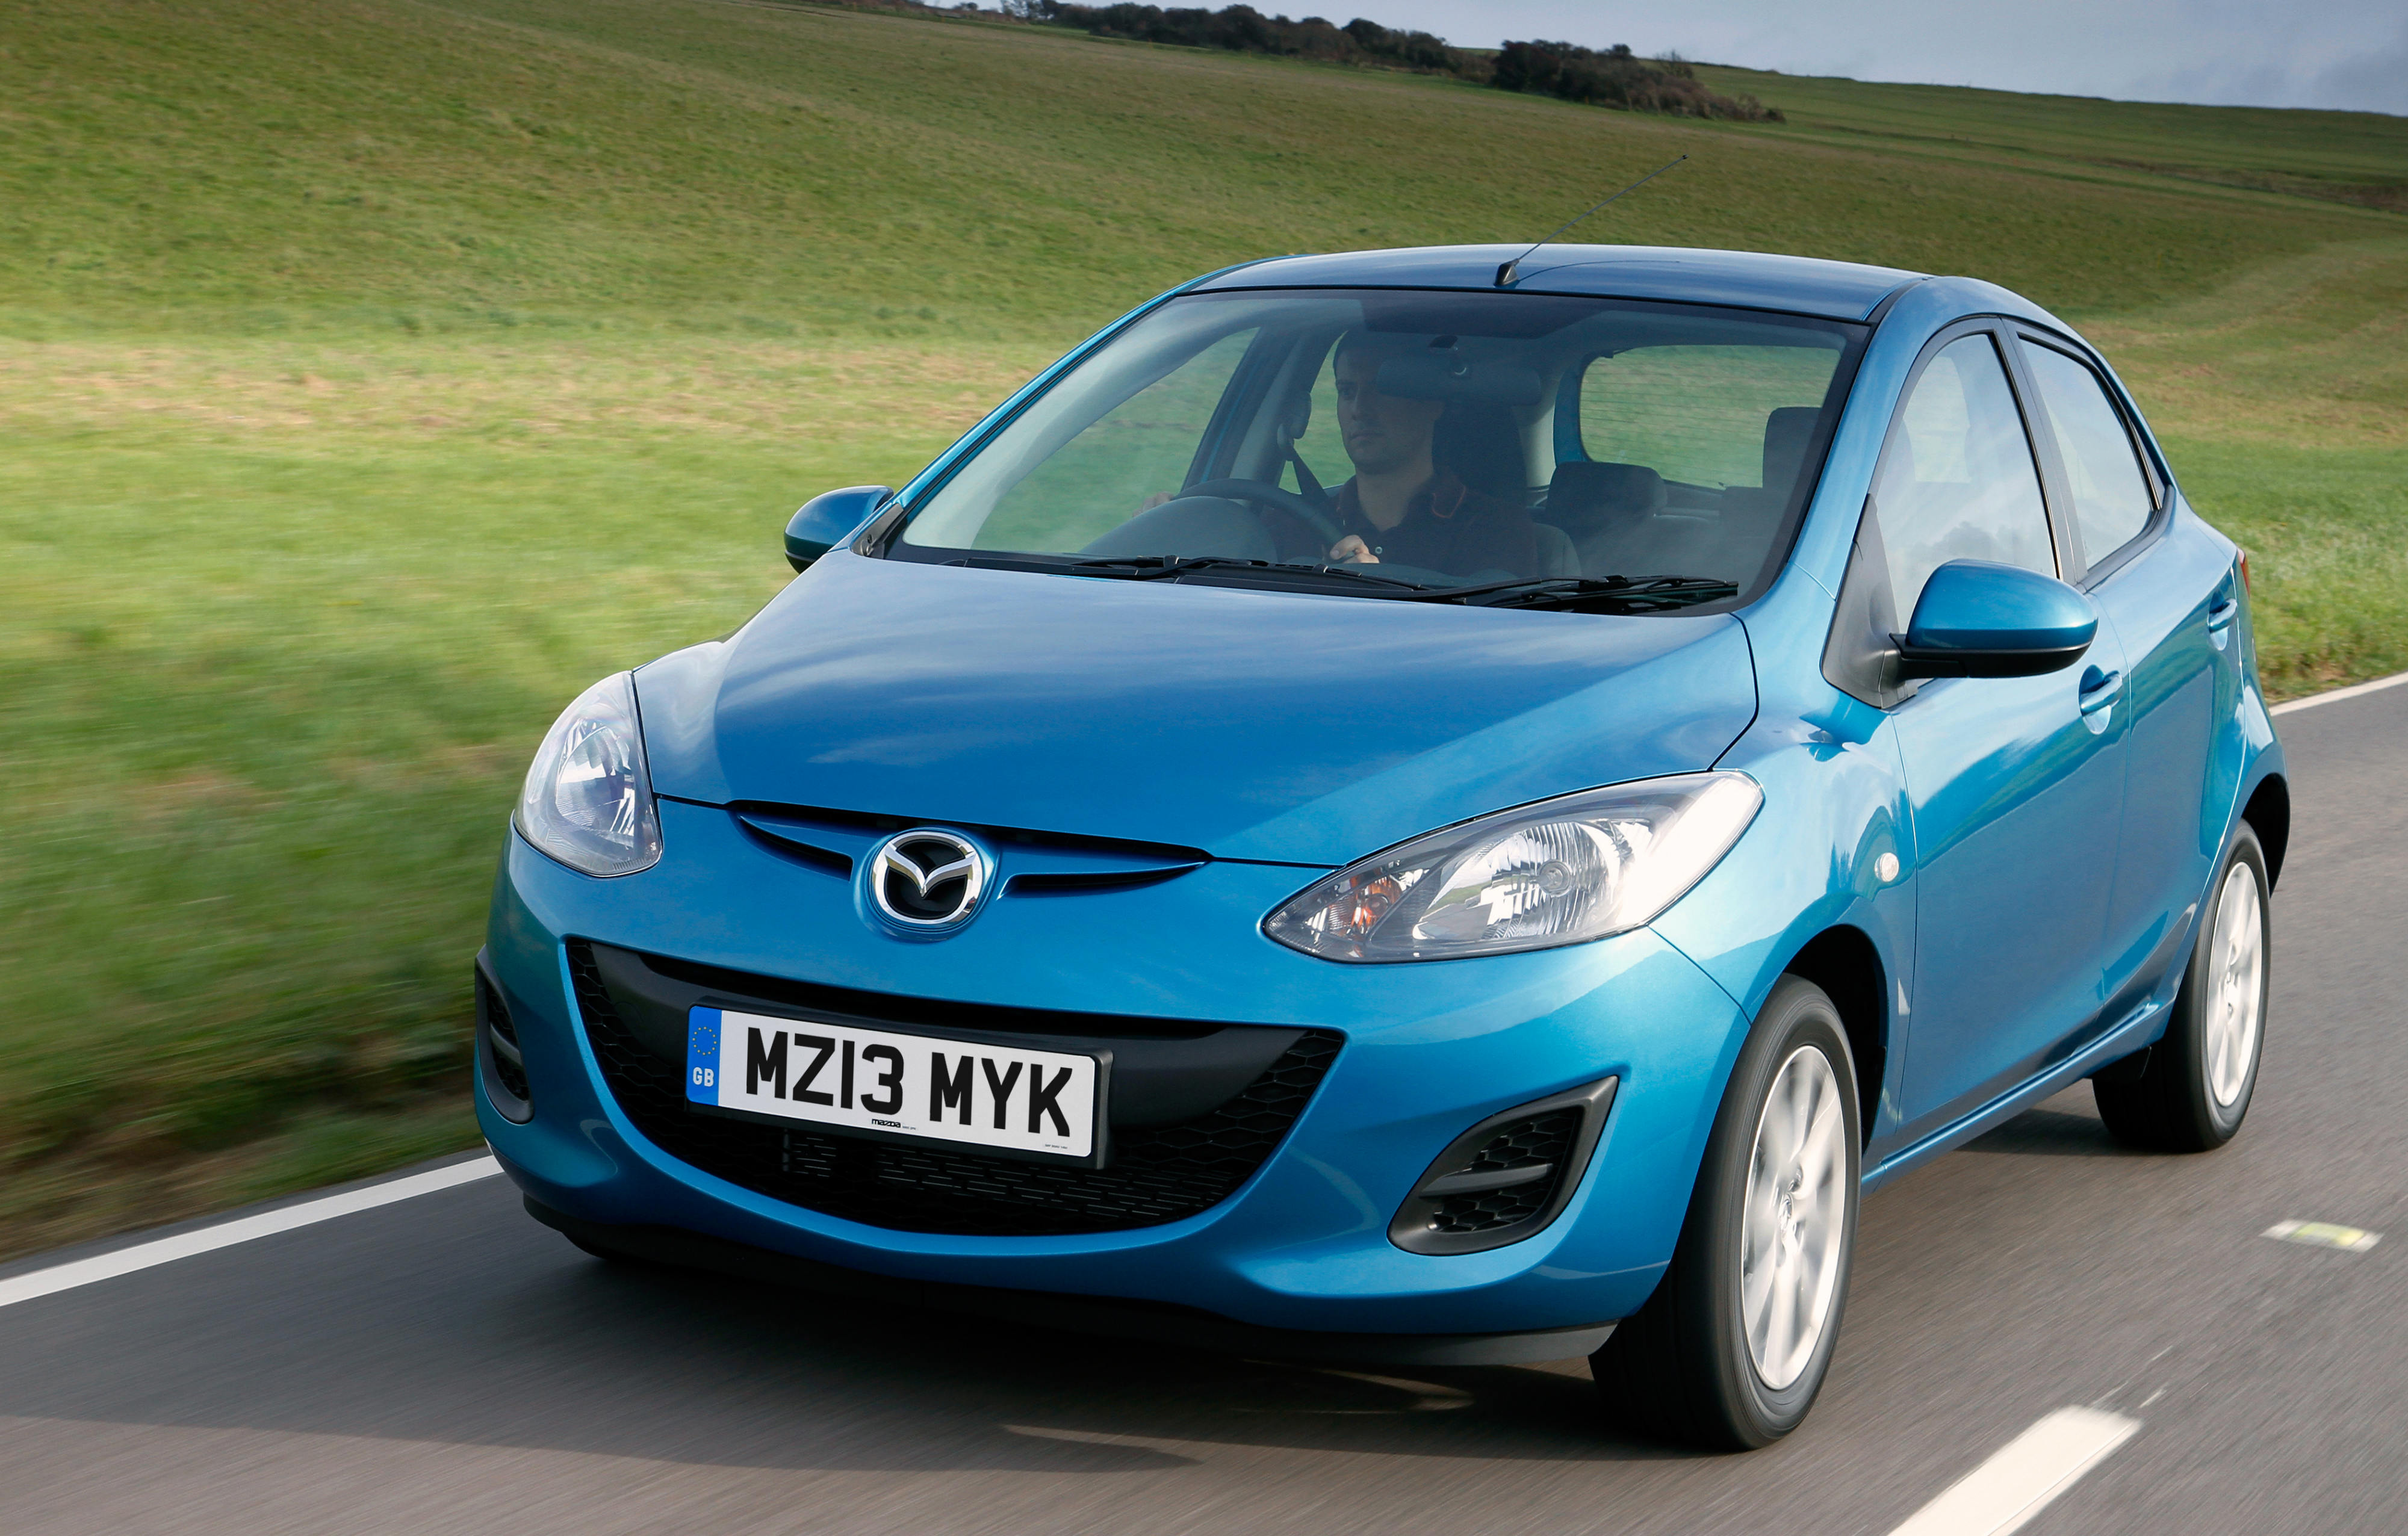 Mazda2 is most reliable supermini according to What Car? readers